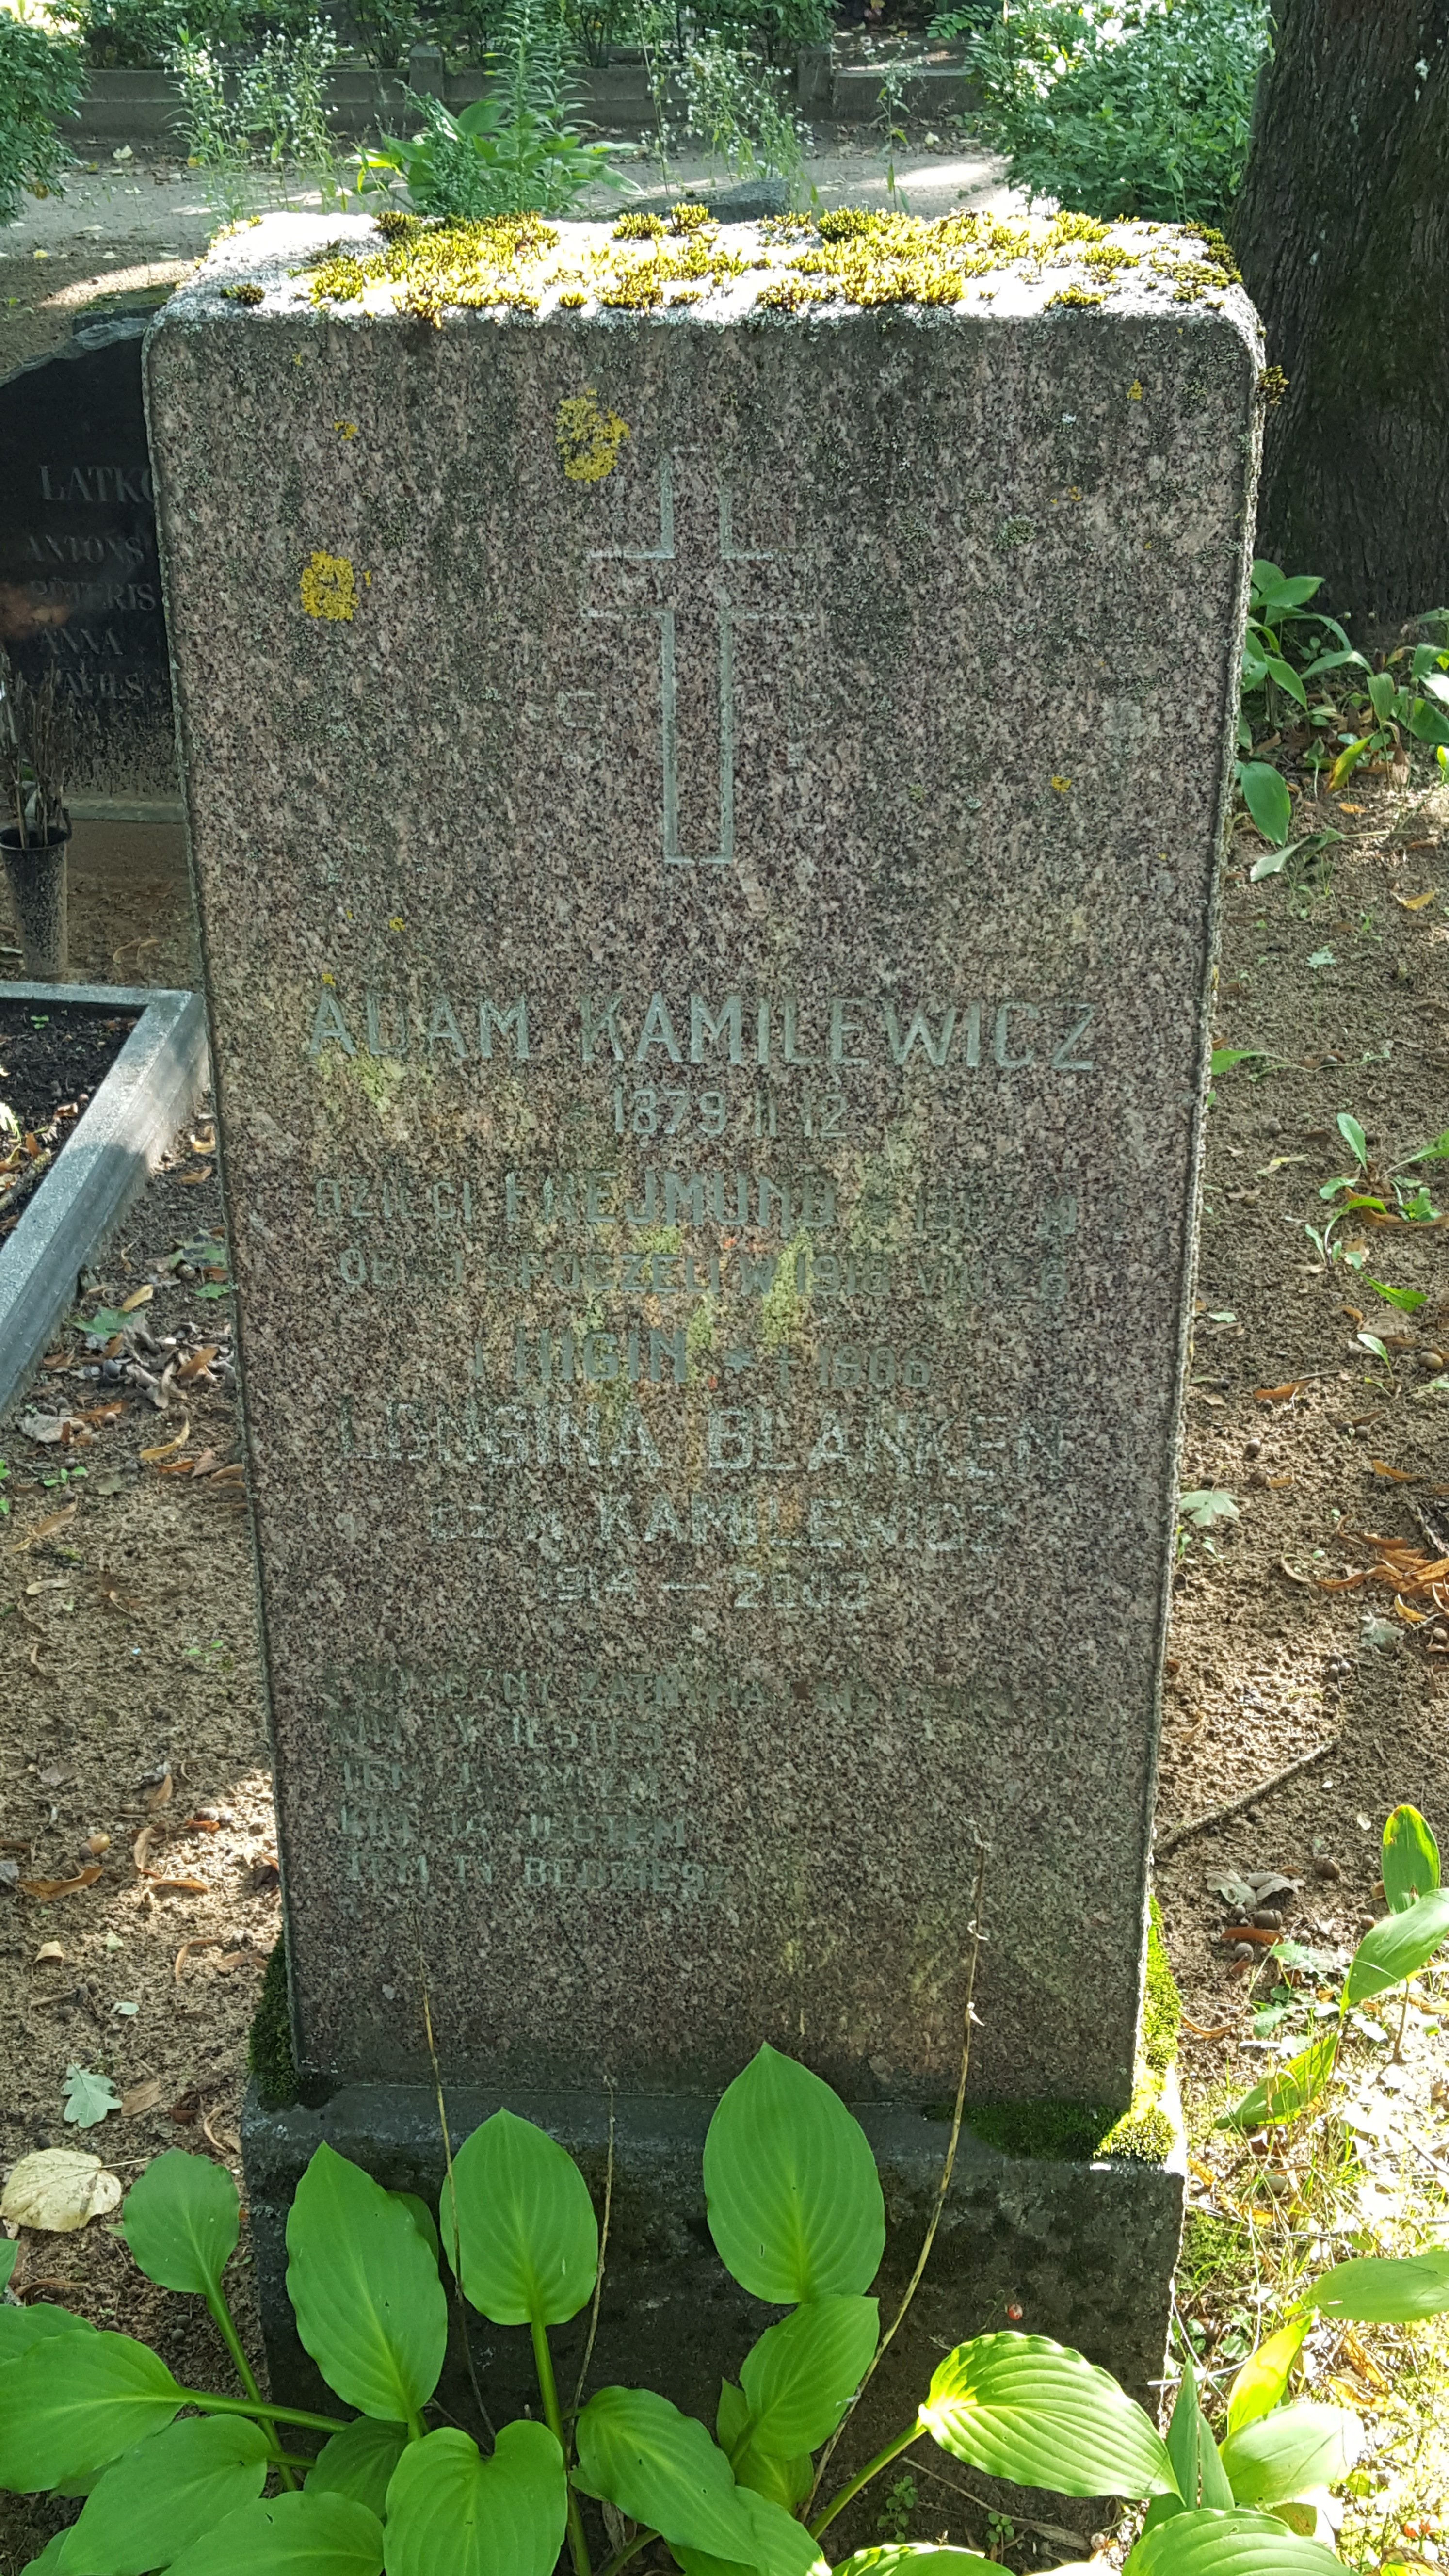 Tombstone of the Kamilewicz family, St Michael's cemetery in Riga, as of 2021.